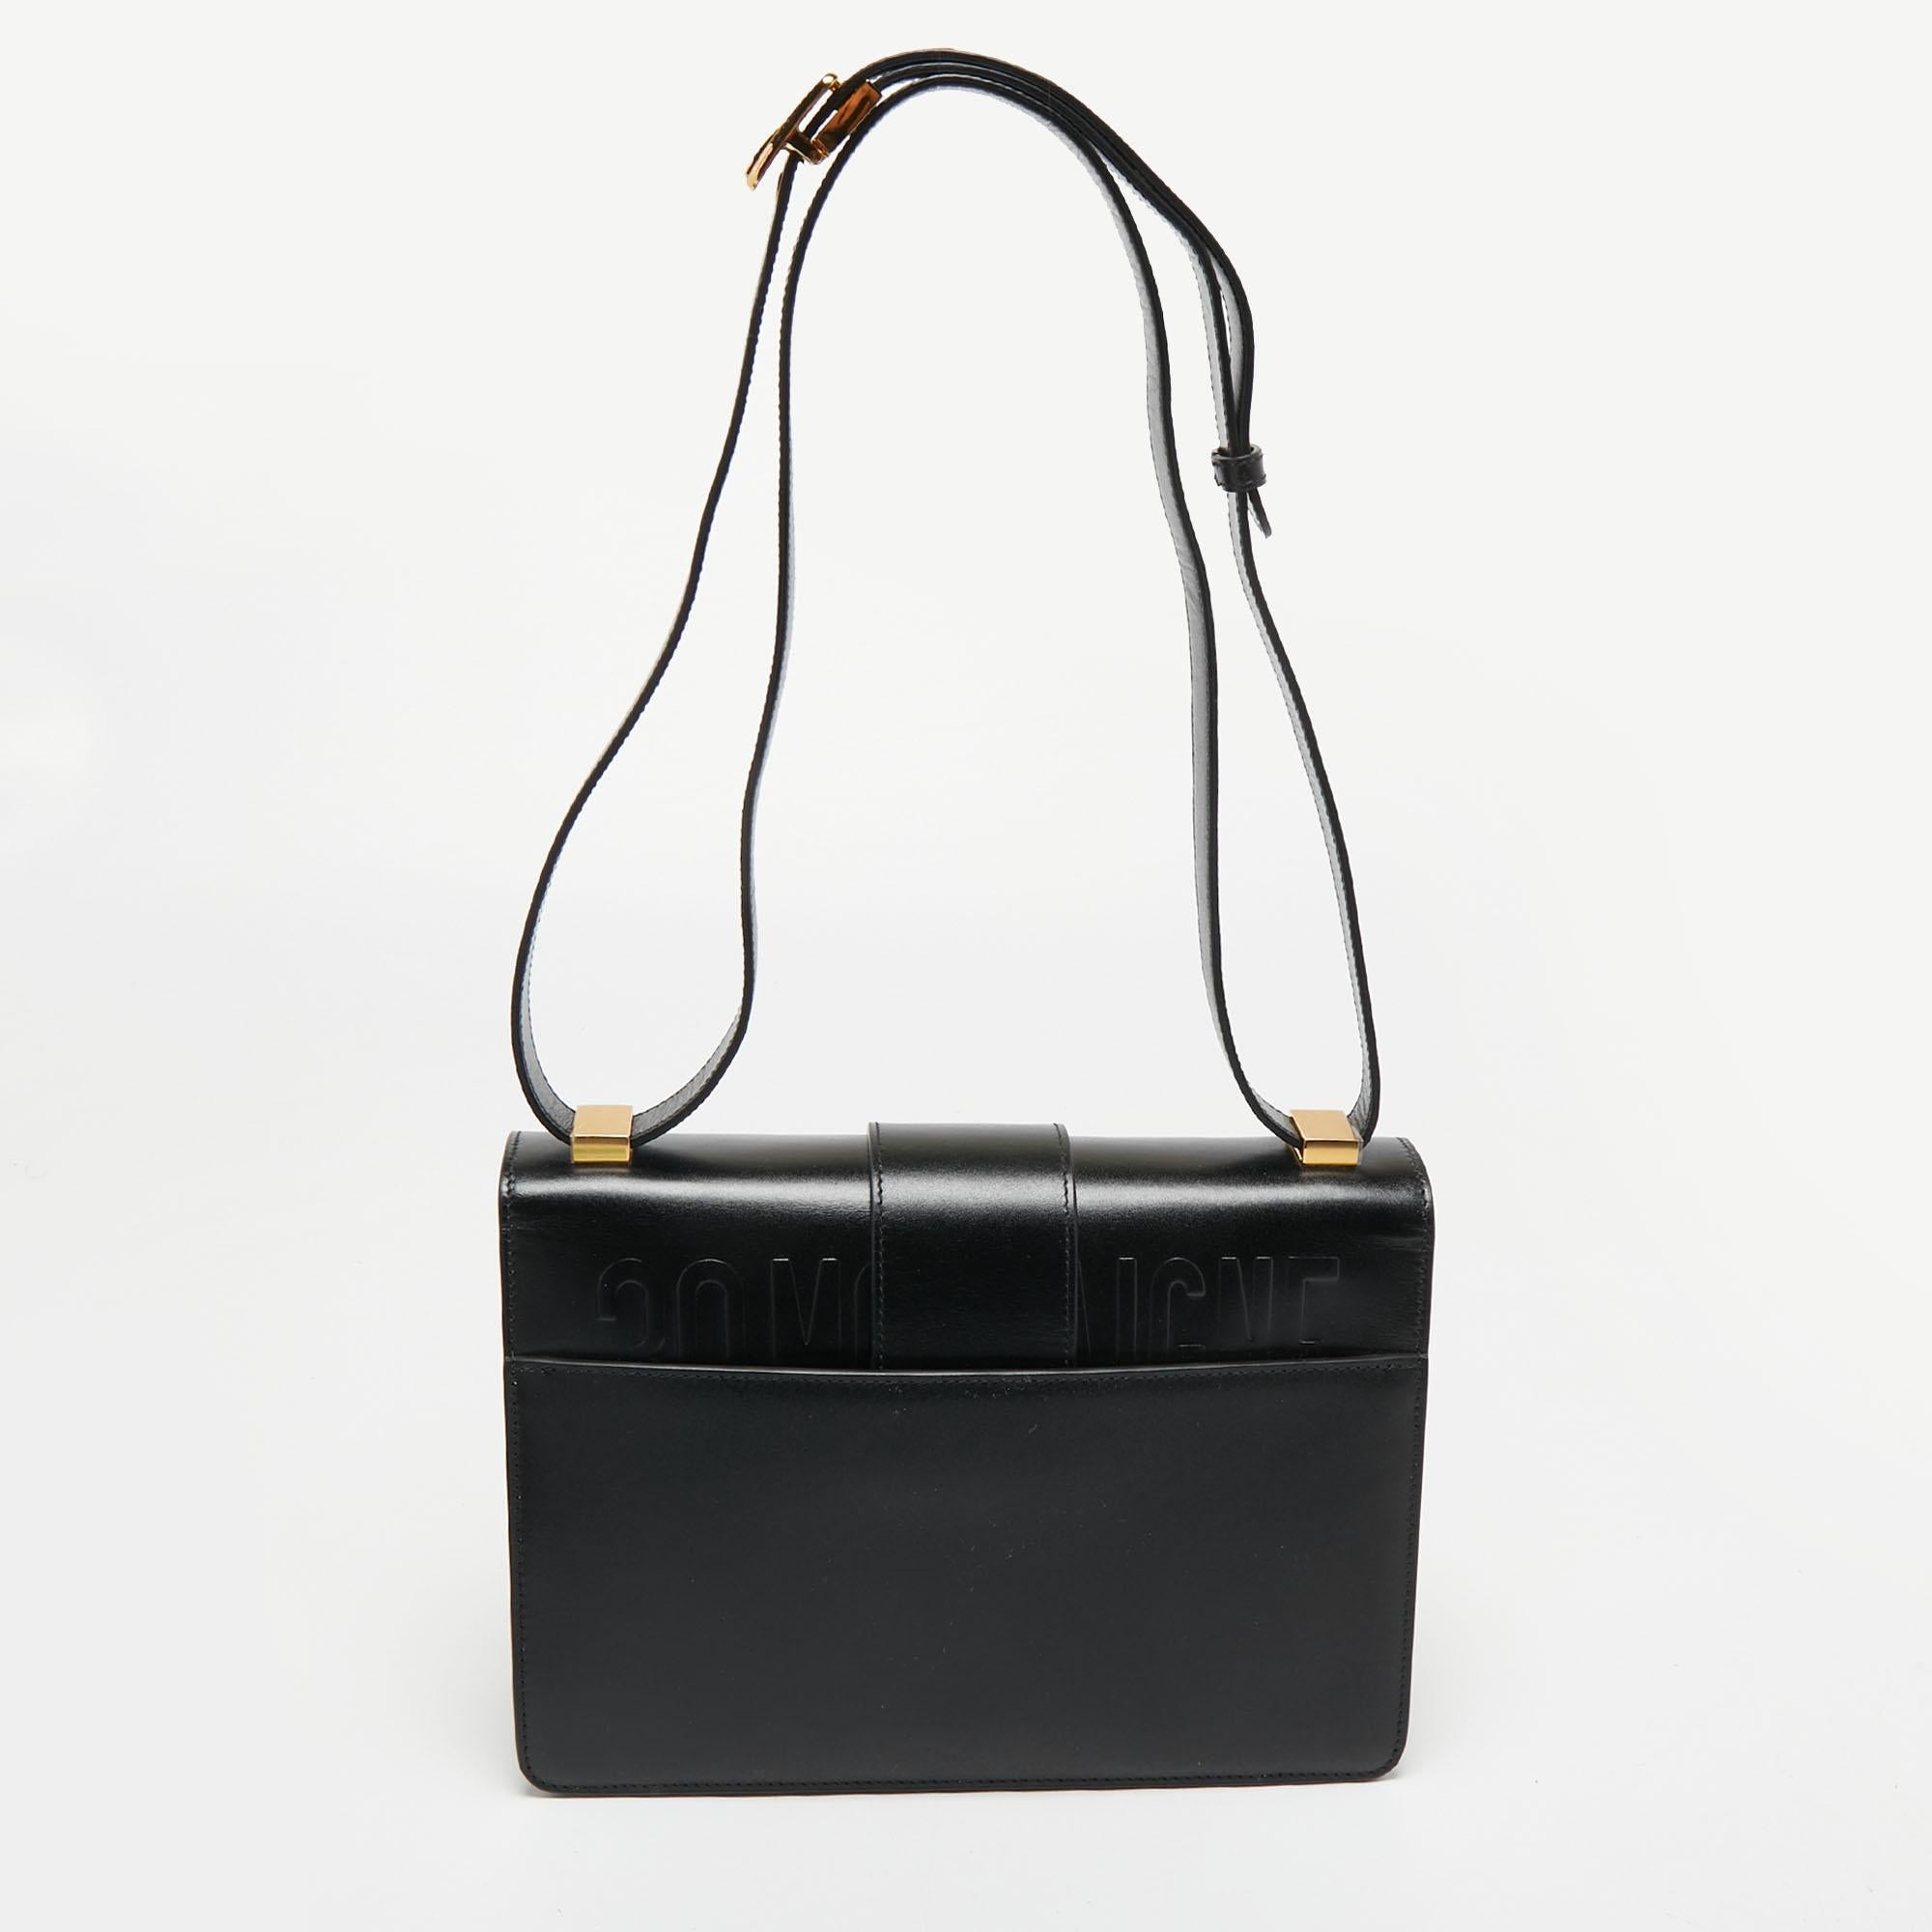 Inspired by the House's hallmark address, this Dior 30 Montaigne shoulder bag is the true embodiment of grace and luxury. The bag features a leather exterior and a gold-toned CD metal clasp on the front that derives its design from the seal of a